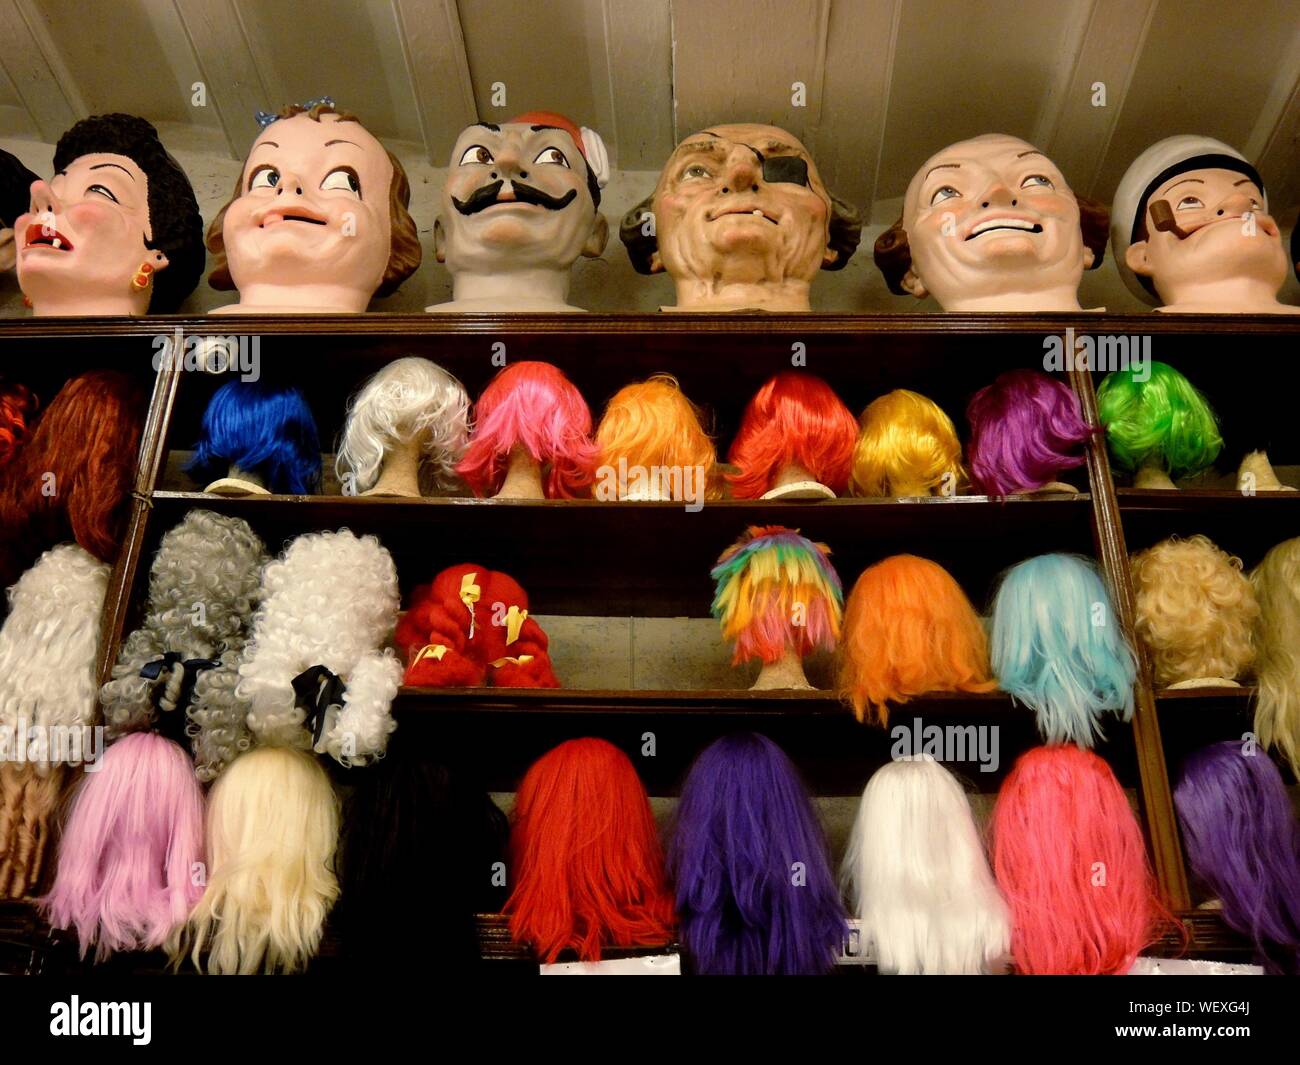 Low Angle View Of Colorful Wigs On Mannequin Heads Over Shelf At Store Stock Photo